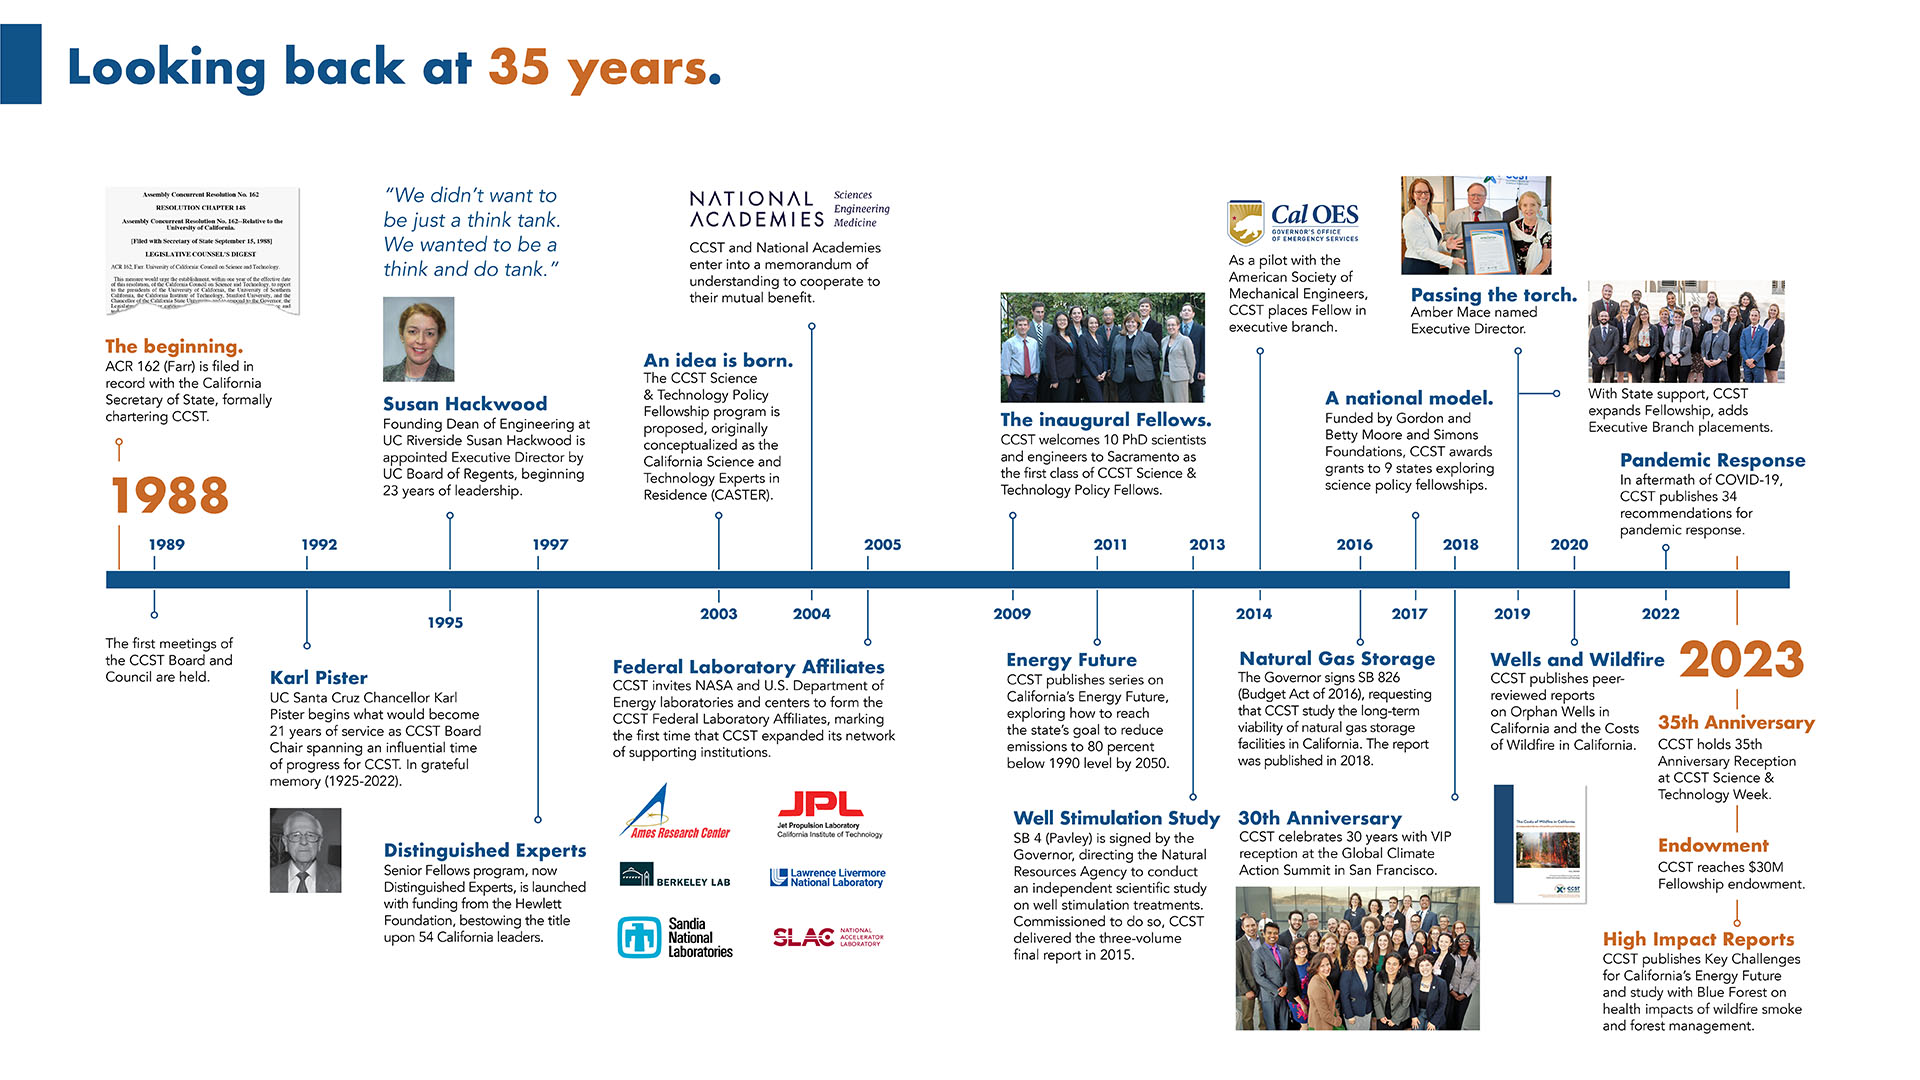 A visual timeline spanning 35 years, with a blue bar spanning across the center and thing lines with years and descriptive text, titles, and images for each event.